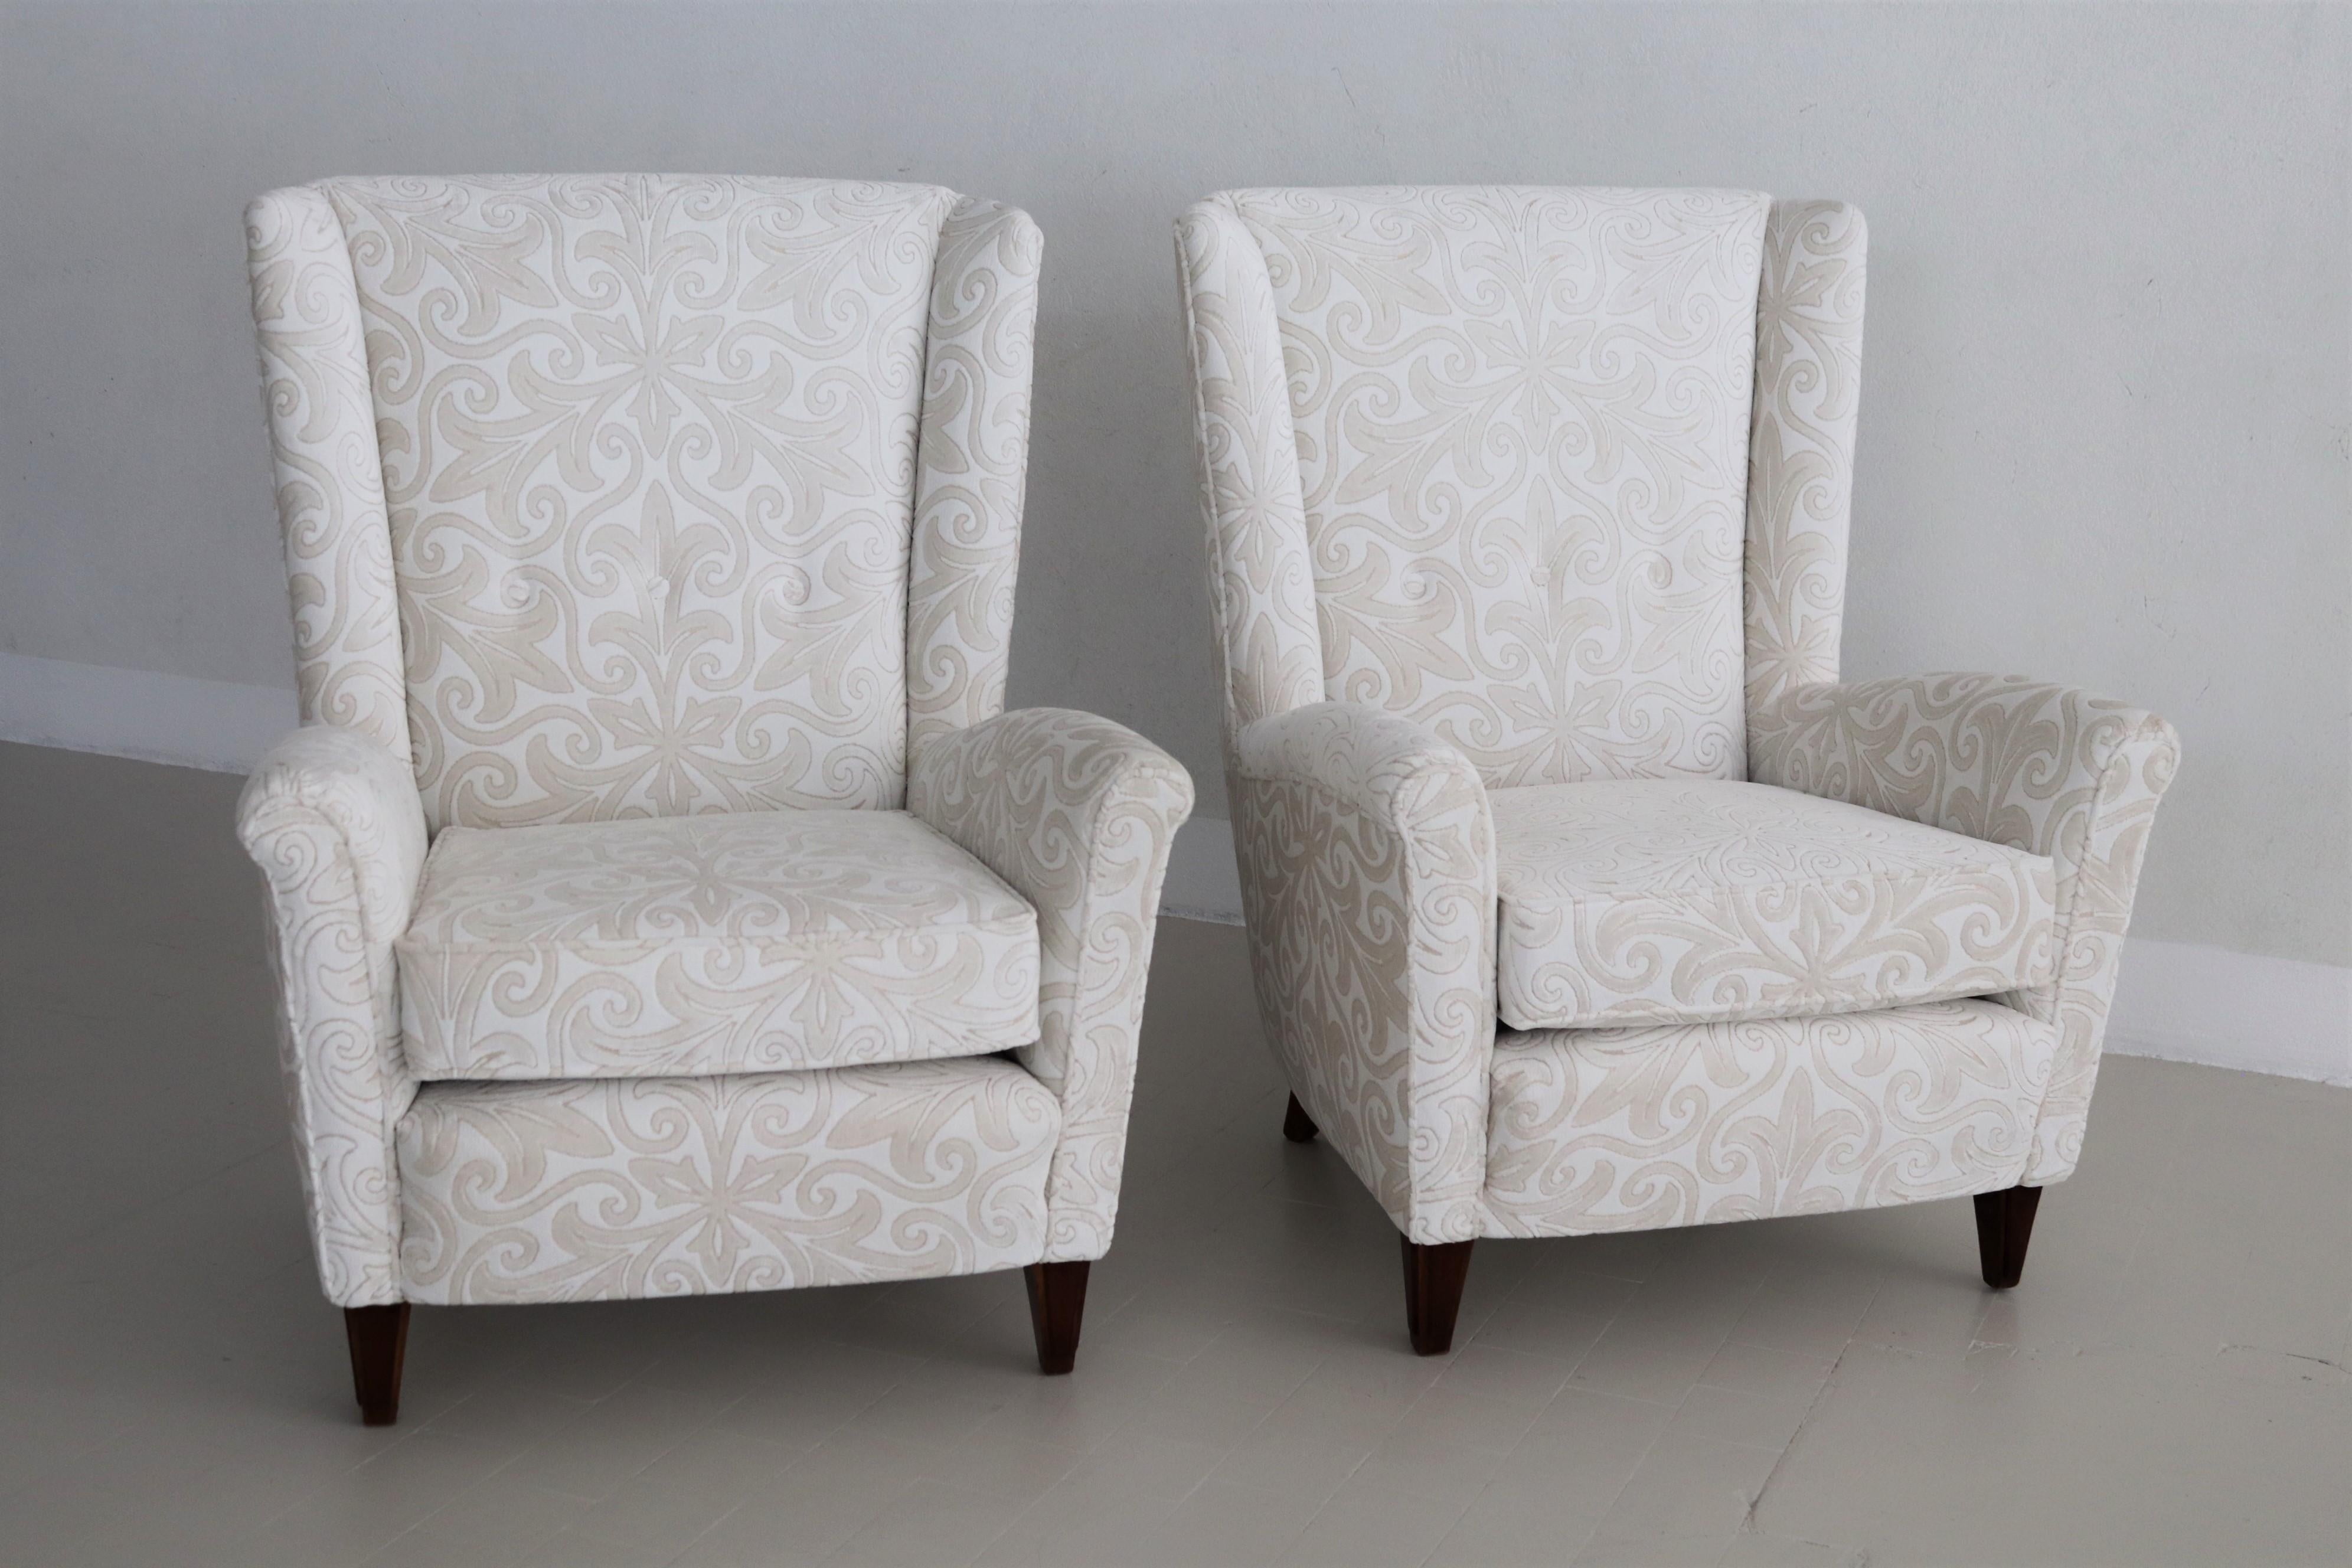 Magnificent pair of two luxury bergères completely restored and re-upholstered with new particular velvet. 
The two cushions are completely new.
Made by Pier Luigi Colli, Turin, during the 1940s-1950s.
The armchairs come with the original 